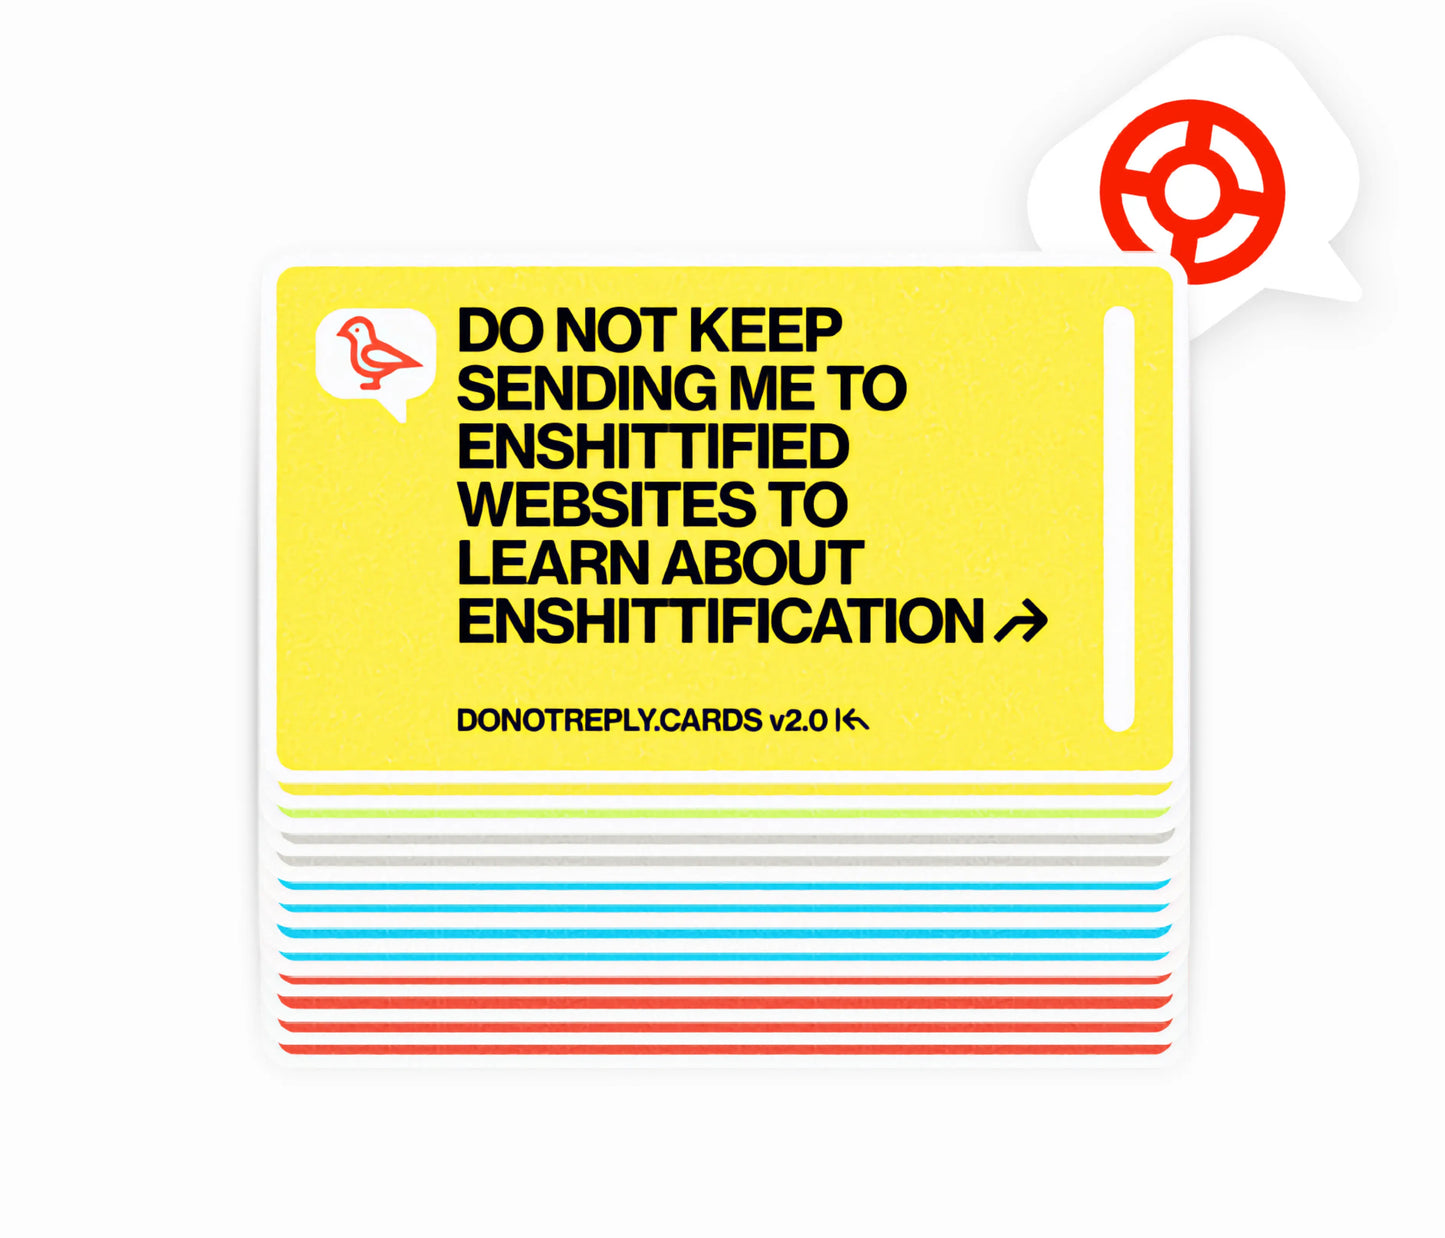 FIRST EDITION RUN OF 15 DO NOT REPLY STICKERS ↱